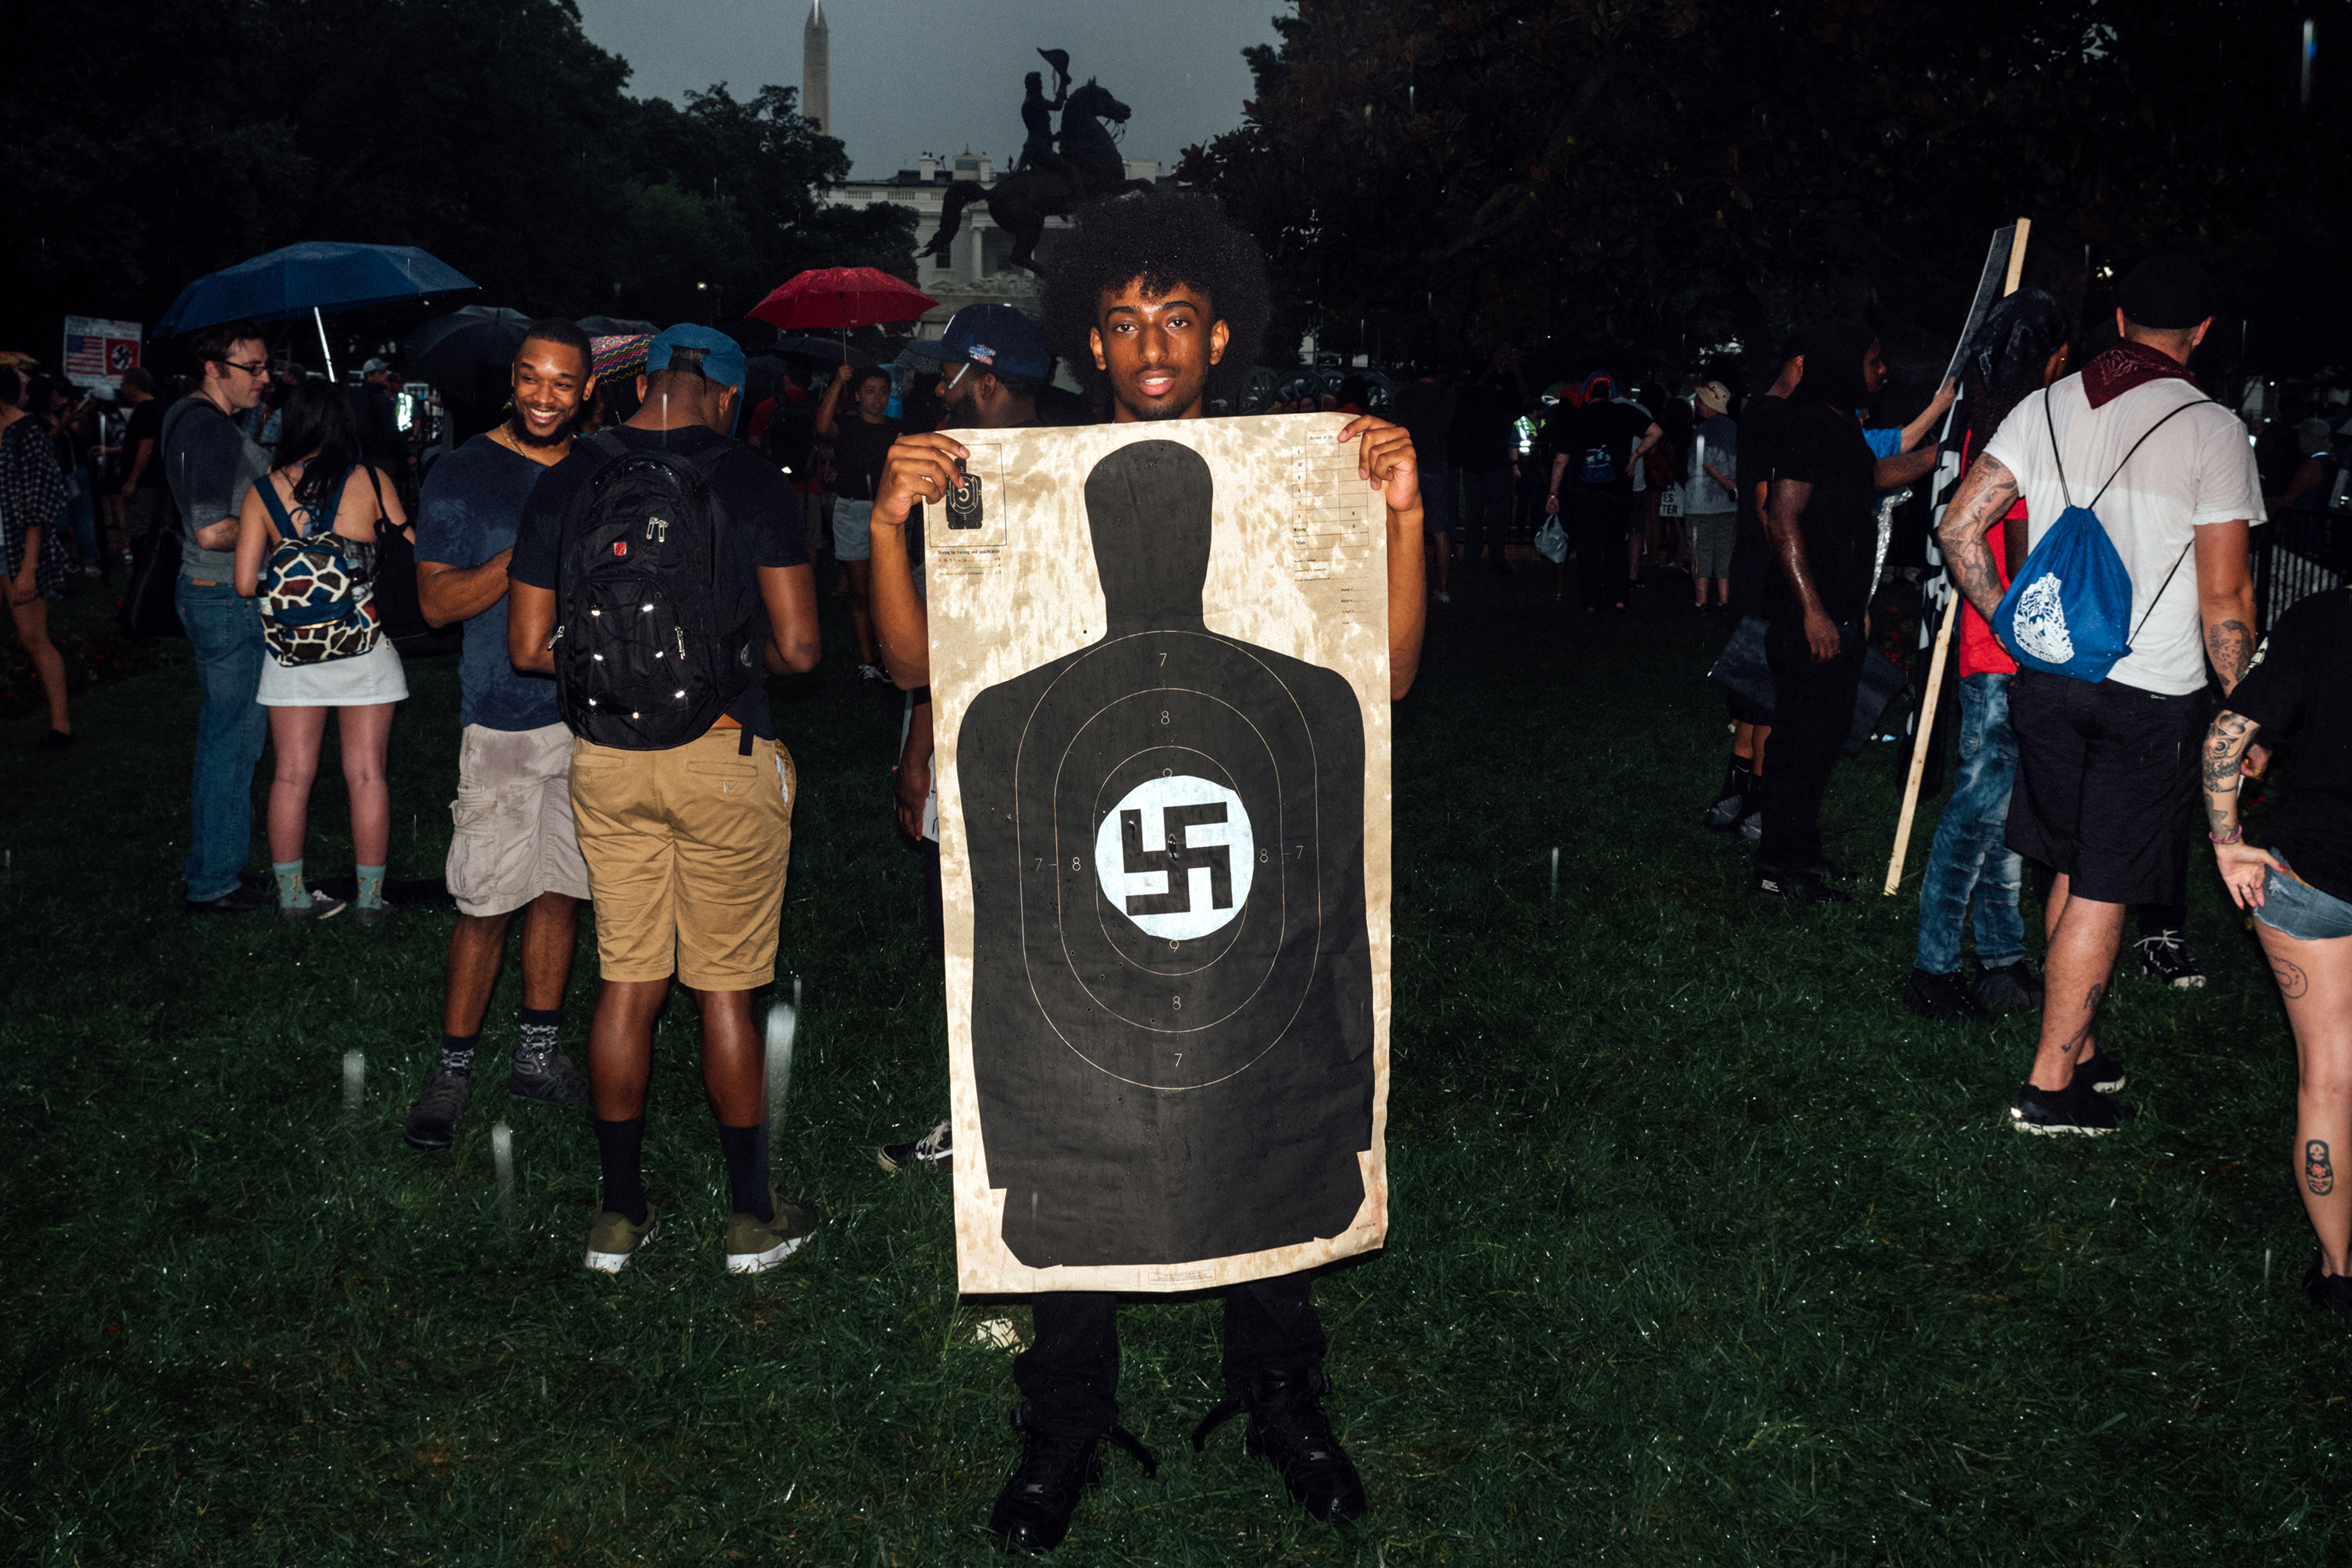 A counter-protester holds a shooting target with a swastika in the middle. (Daniel Arnold for TIME)